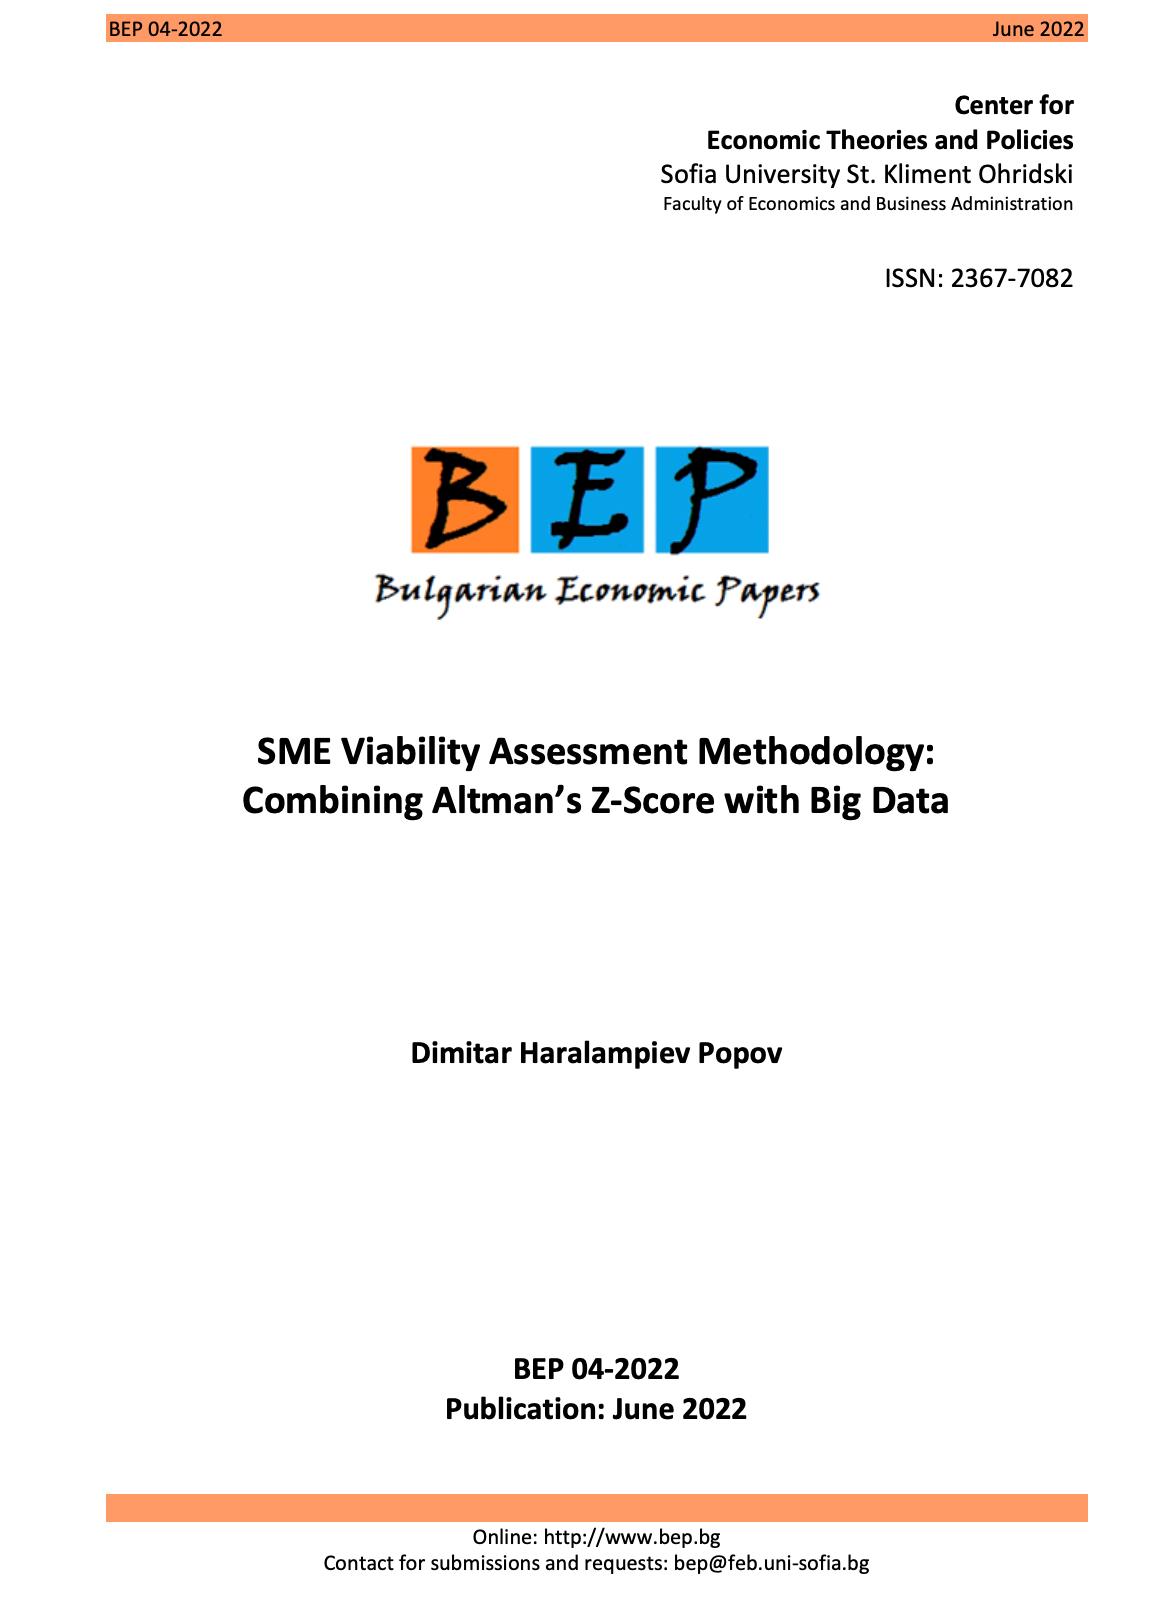 SME Viability Assessment Methodology: Combining Altman’s Z-Score with Big Data (1999-2020)